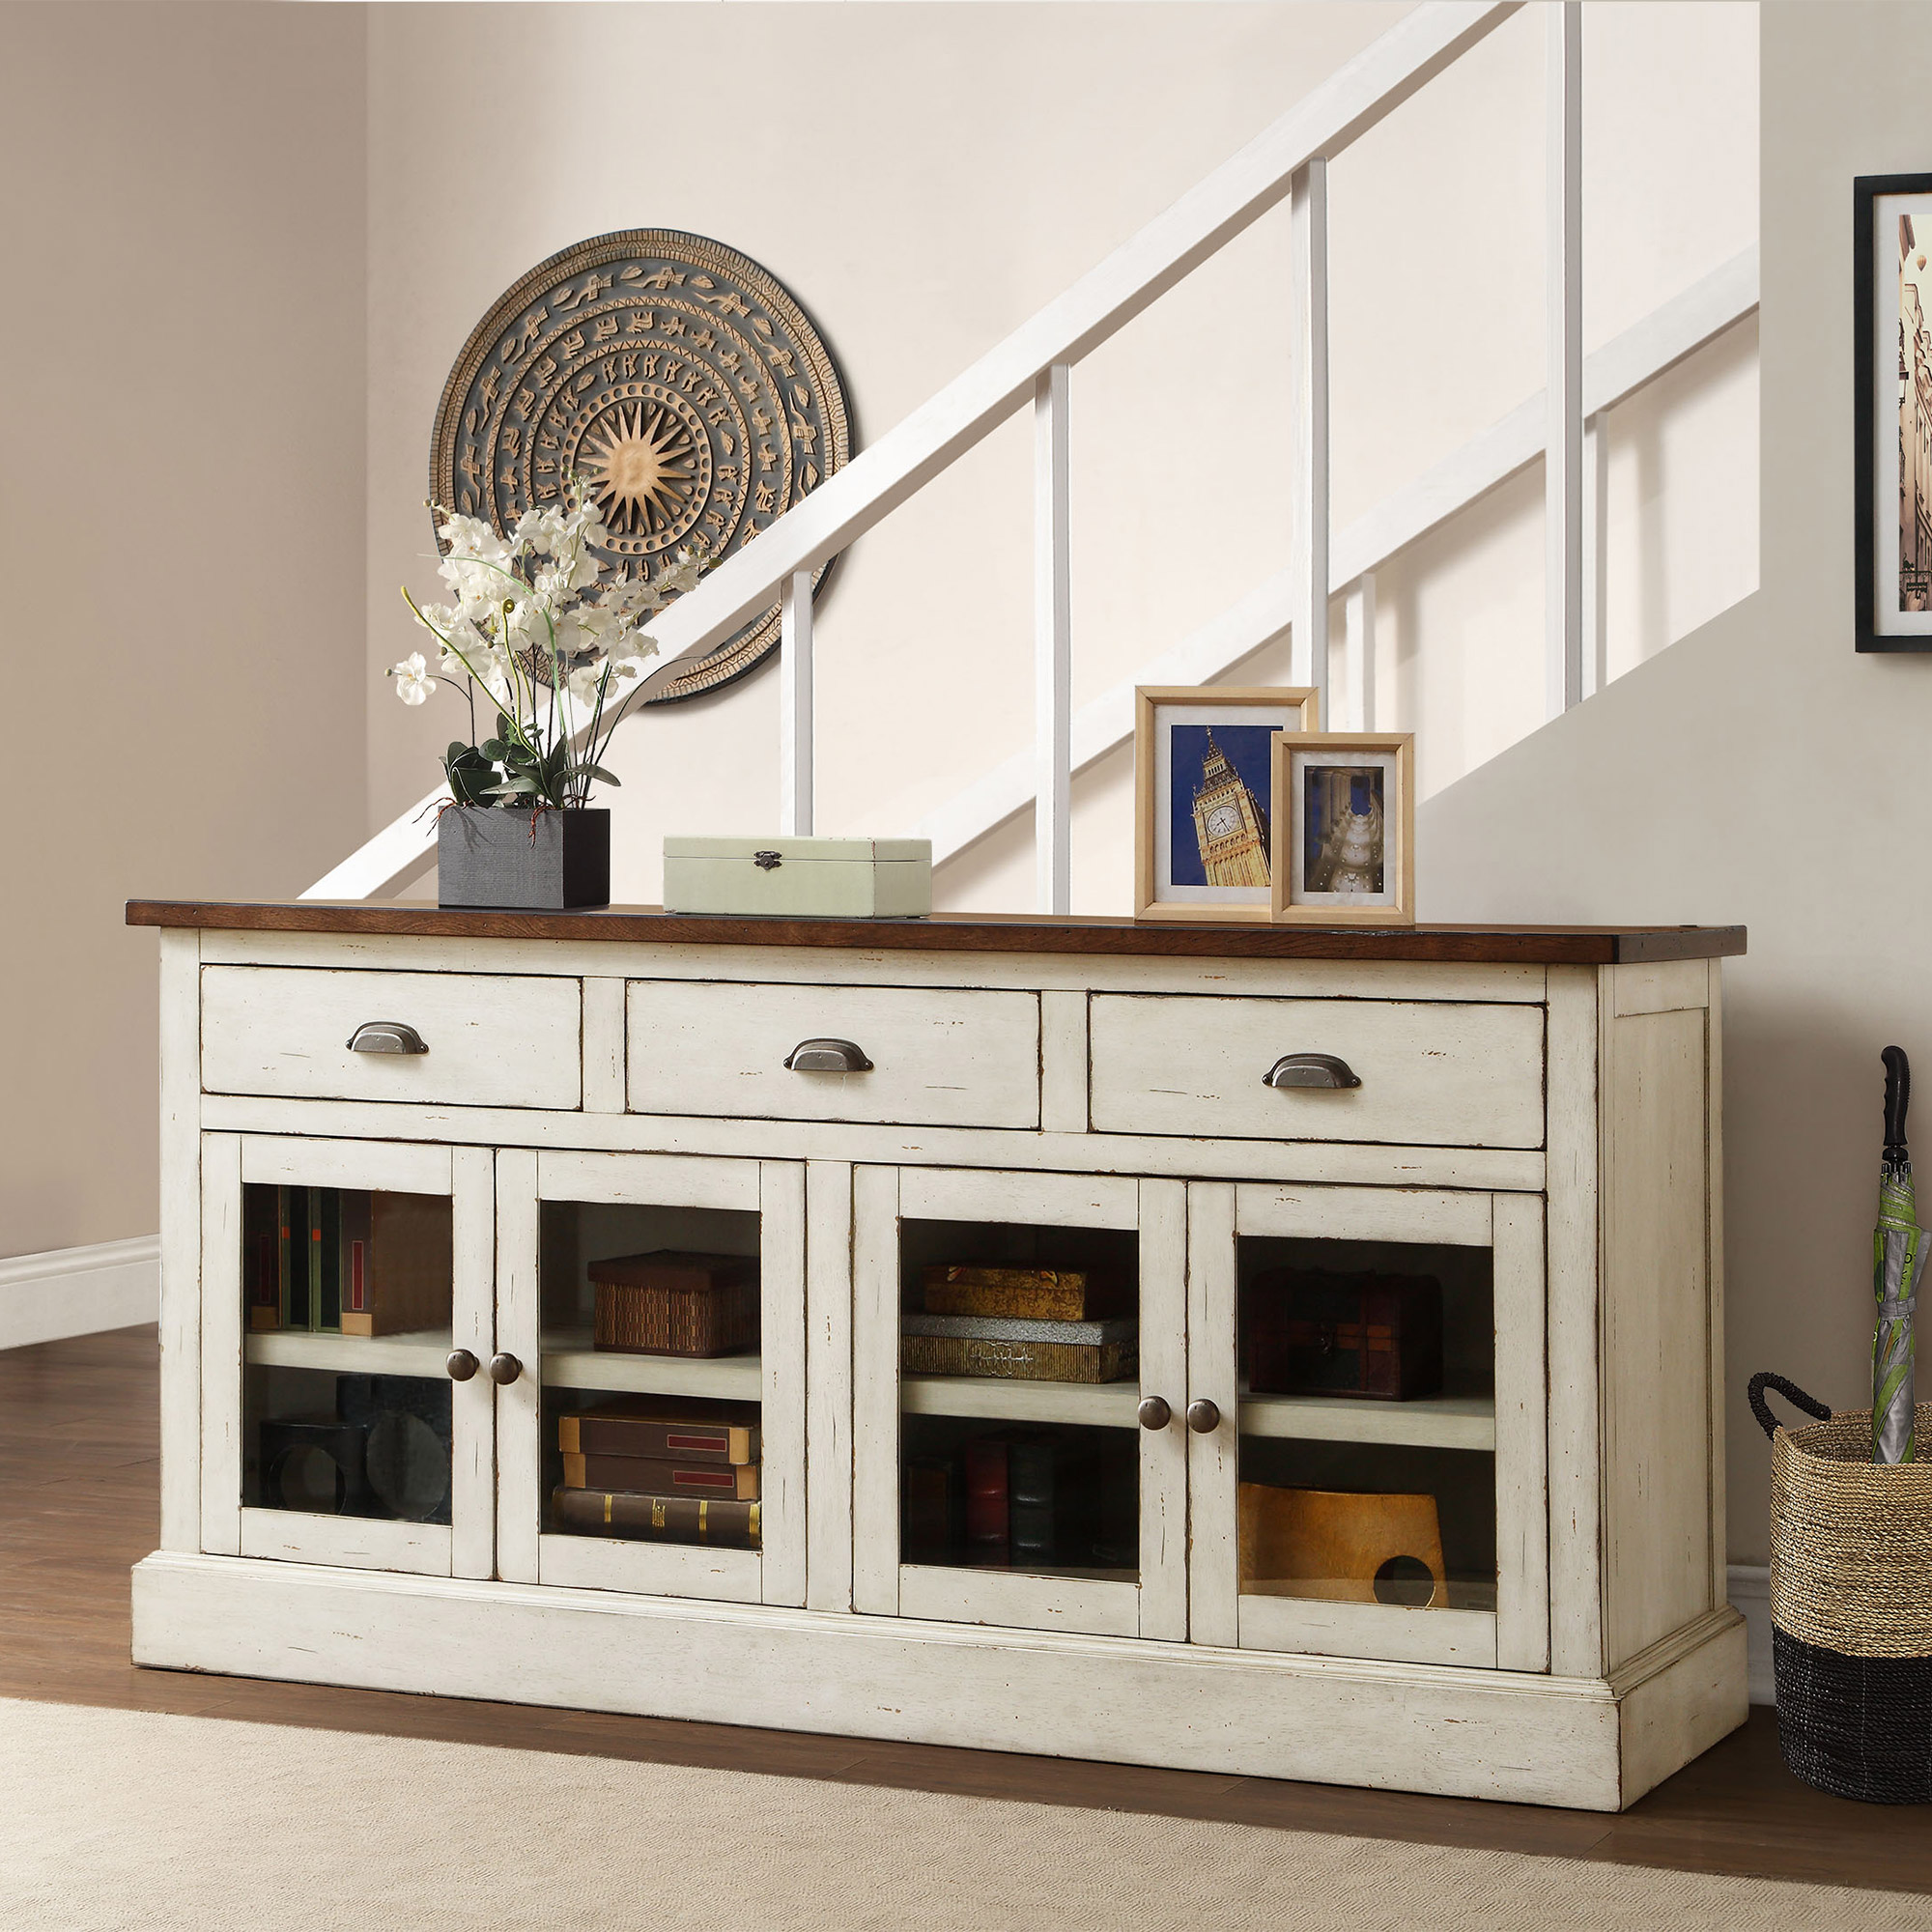 Bayside Furnishings Accent Cabinet | Bruin Blog